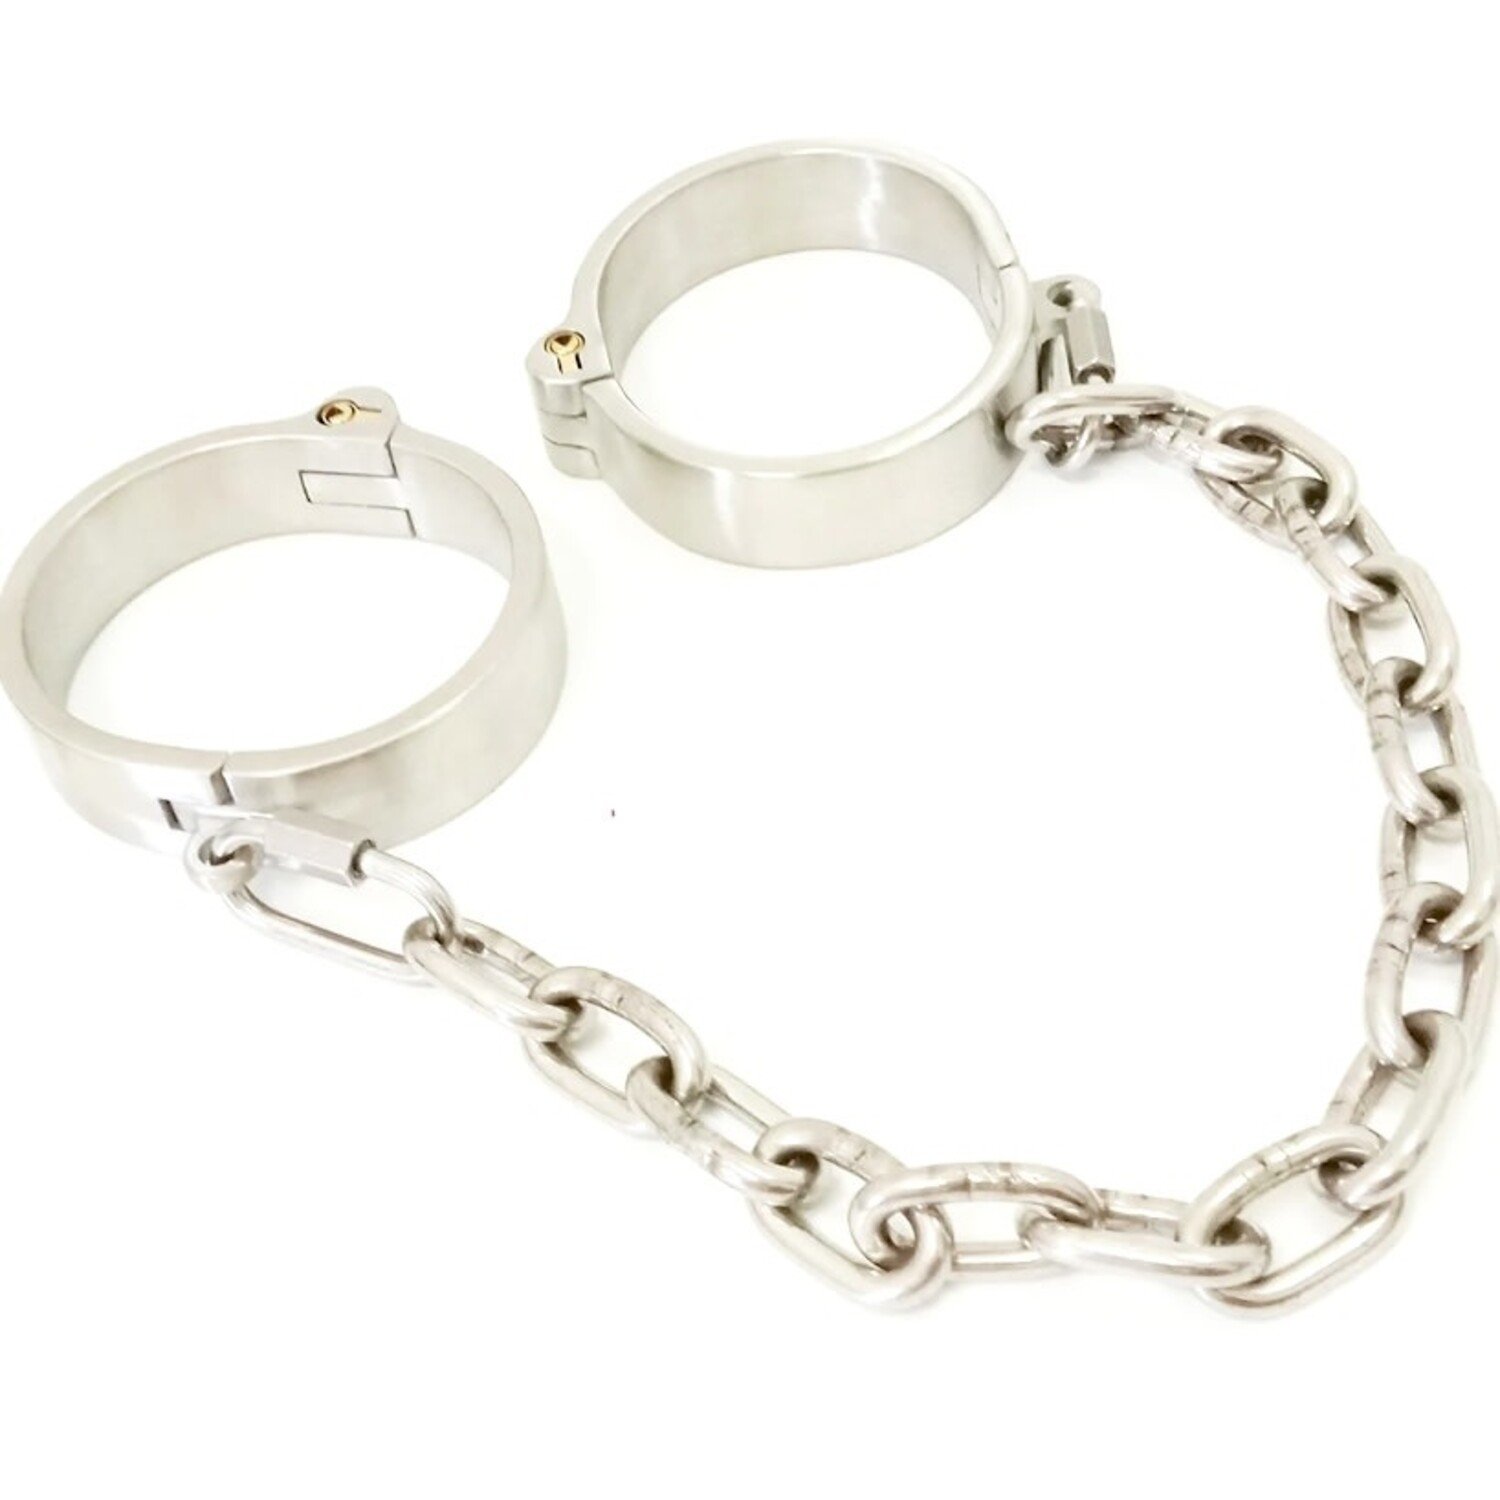 Brushed Stainless Steel Own Me Ankle Cuffs